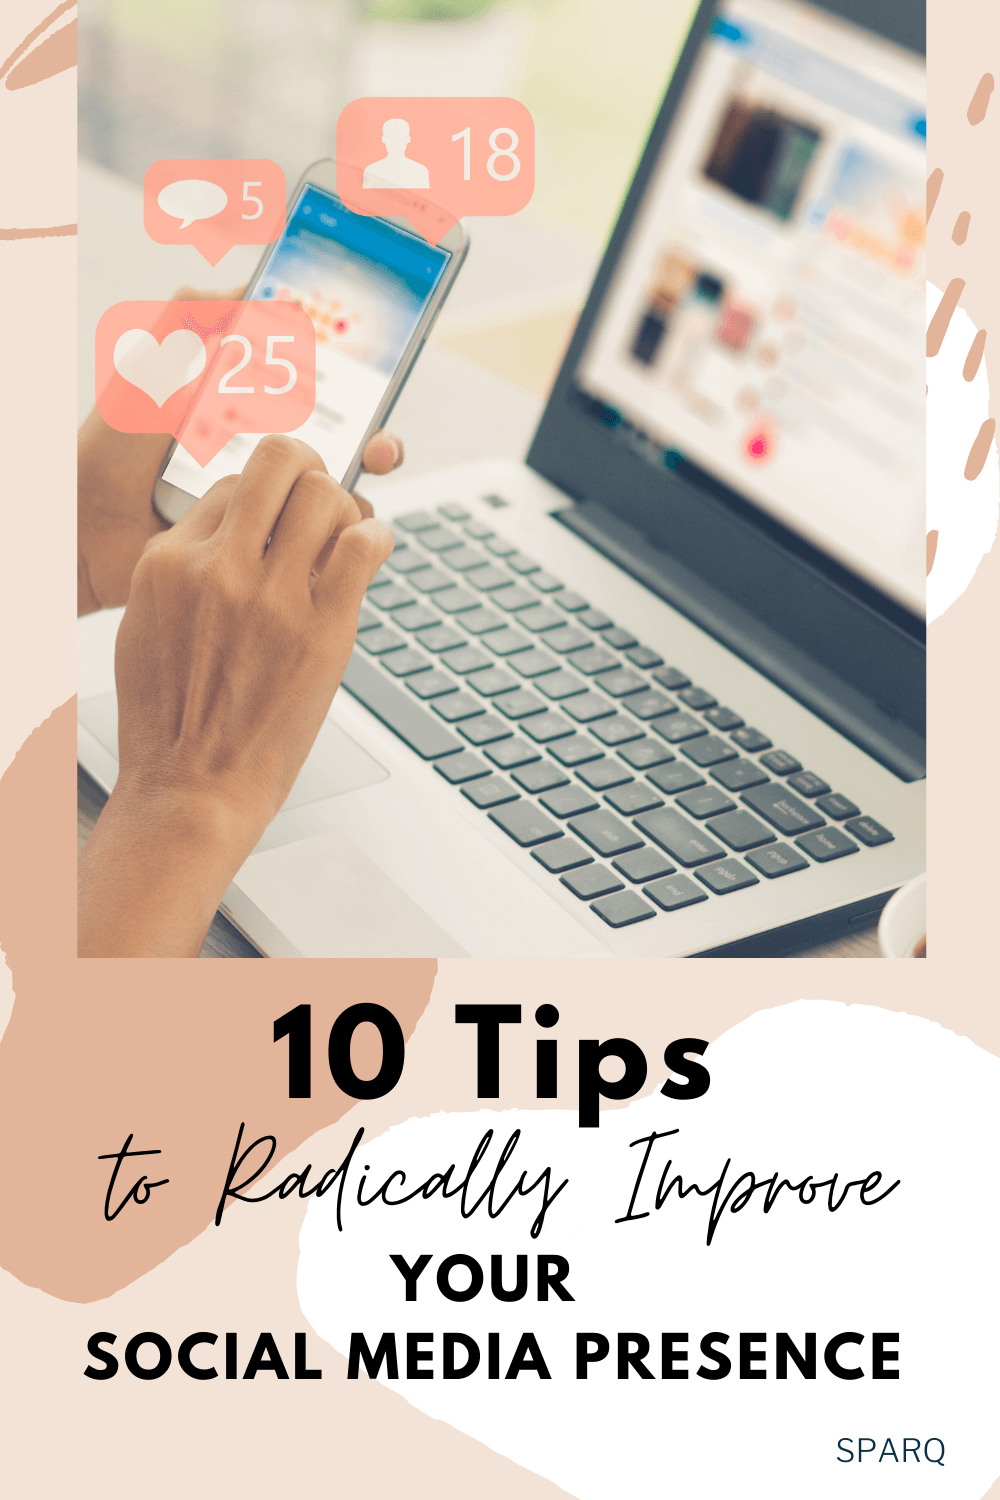 10 Tips To Radically Improve Your Social Media Presence Syndication Cloud